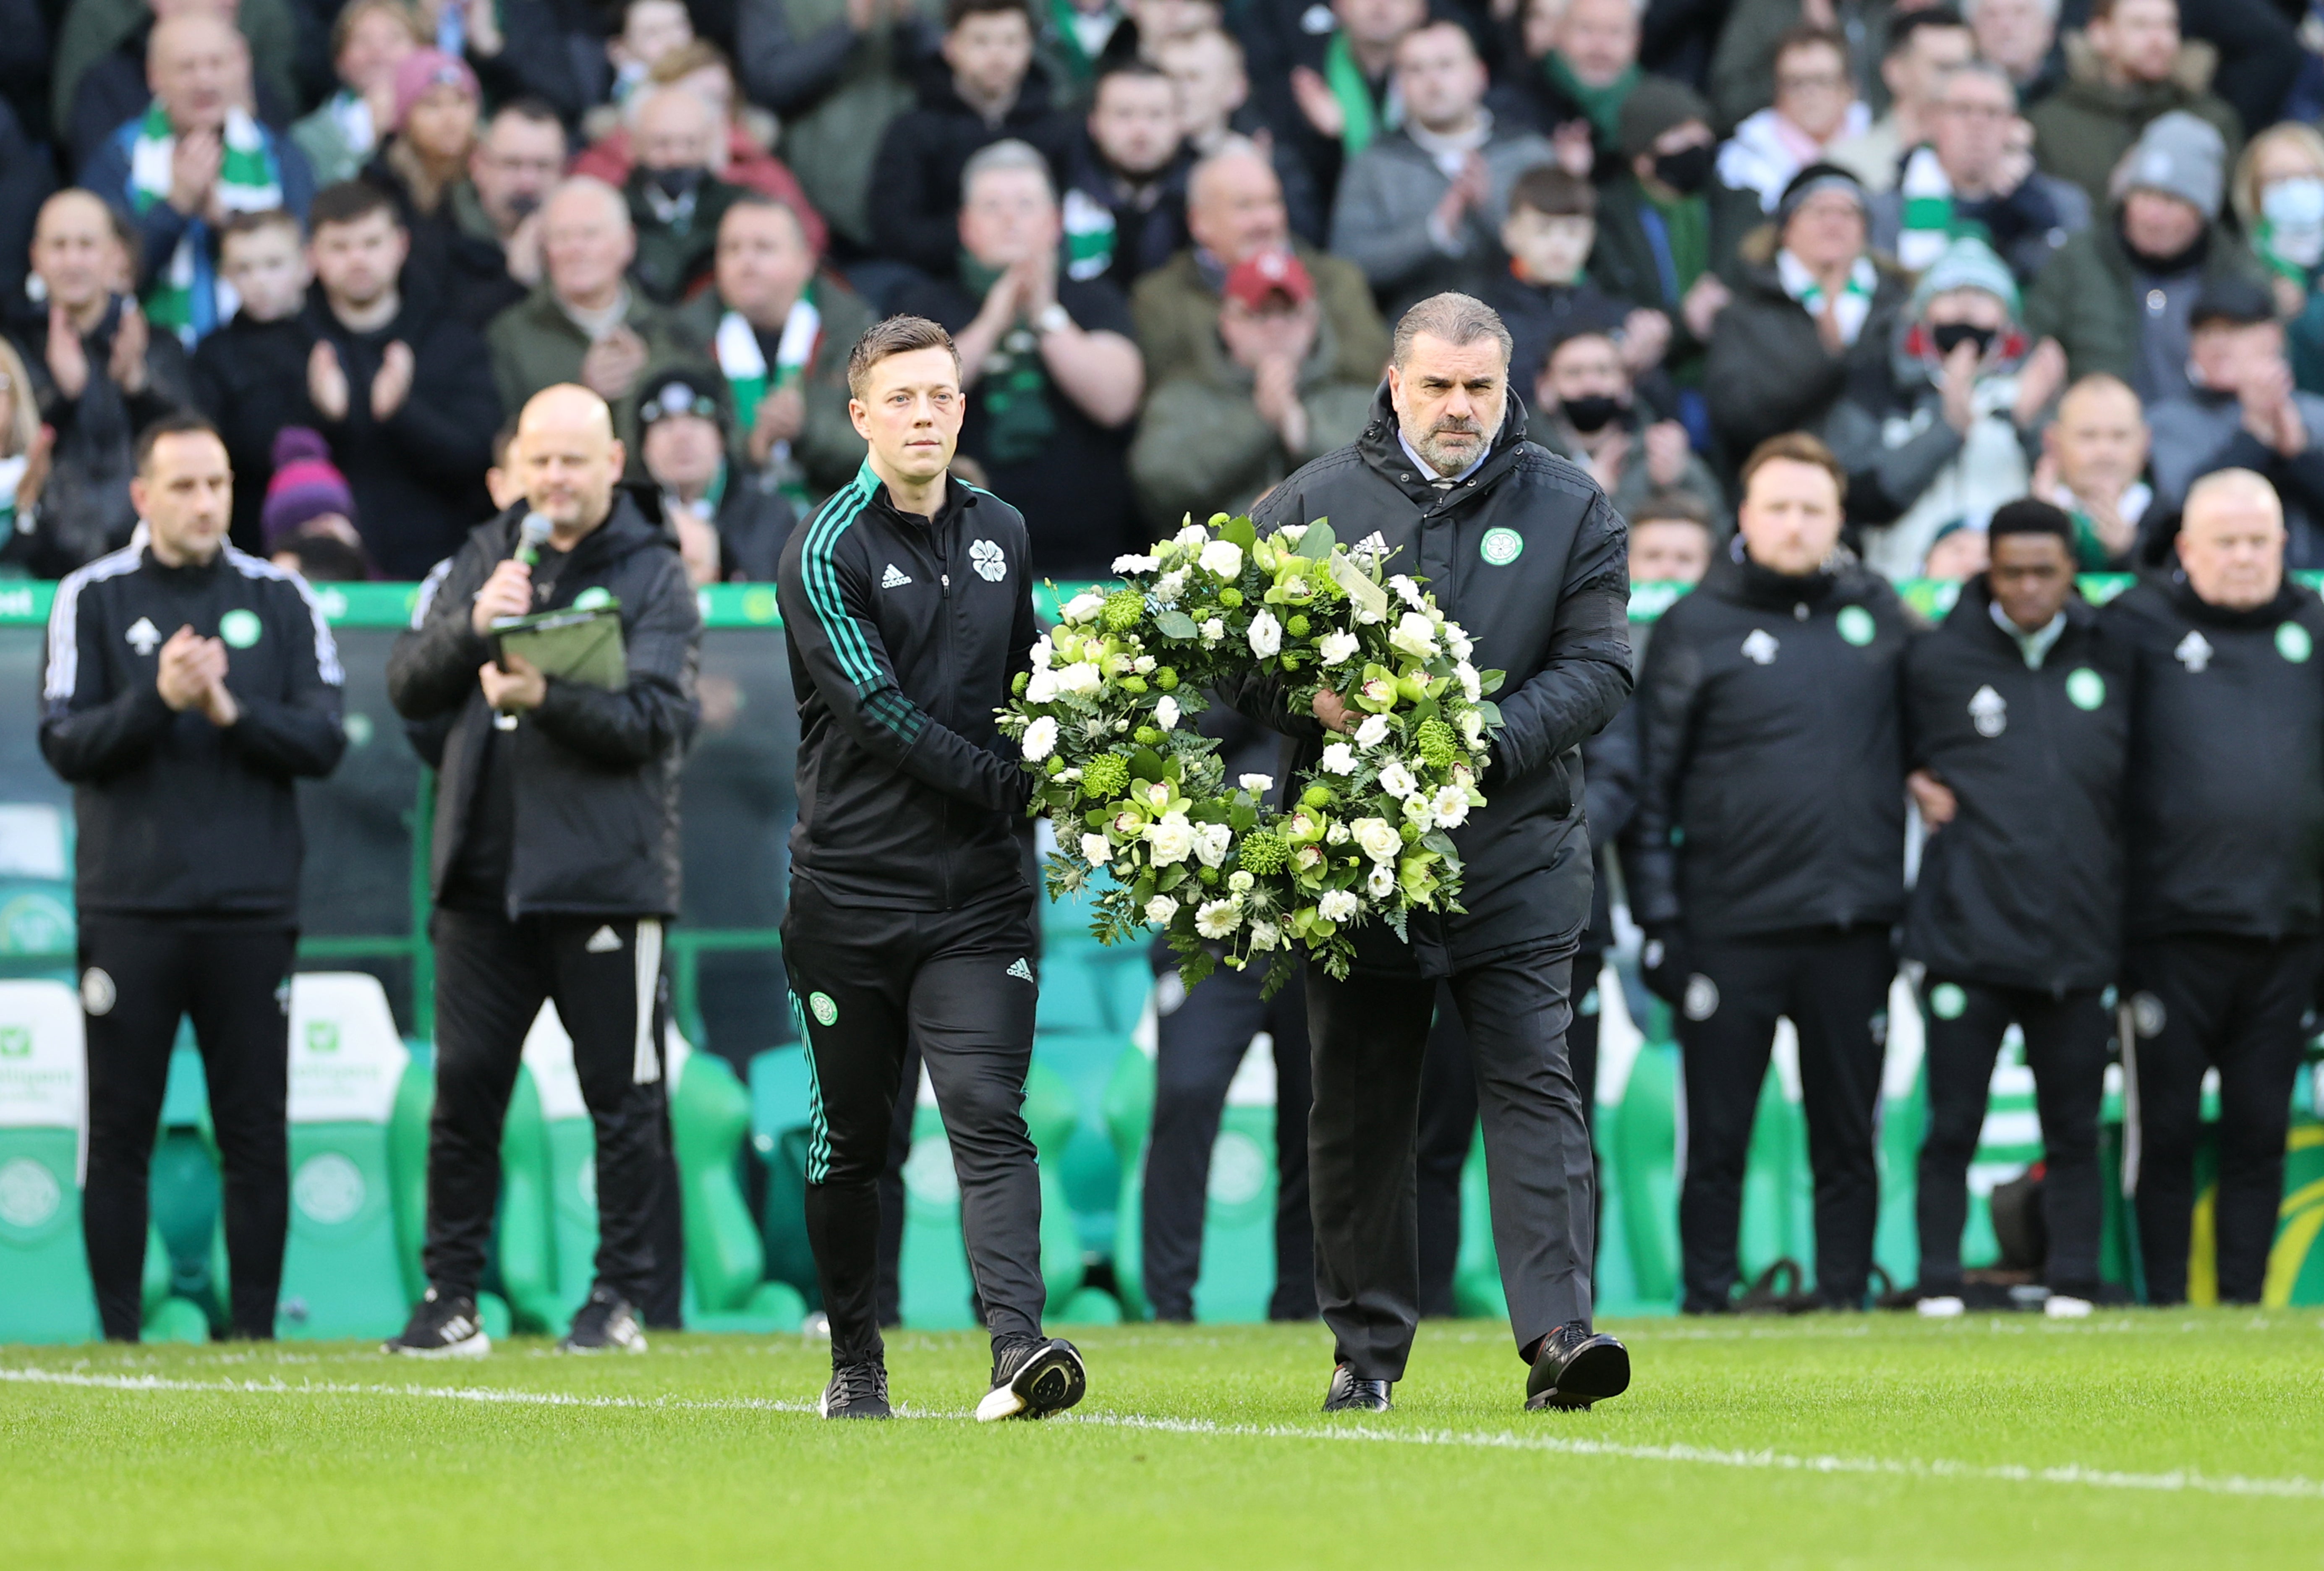 Before Celtic’s own dramatic victory, current boss Ange Postecoglou and captain Callum McGregor paid tribute to the late Wim Jansen before their 1-0 victory over Dundee United (Steve Welsh/PA)